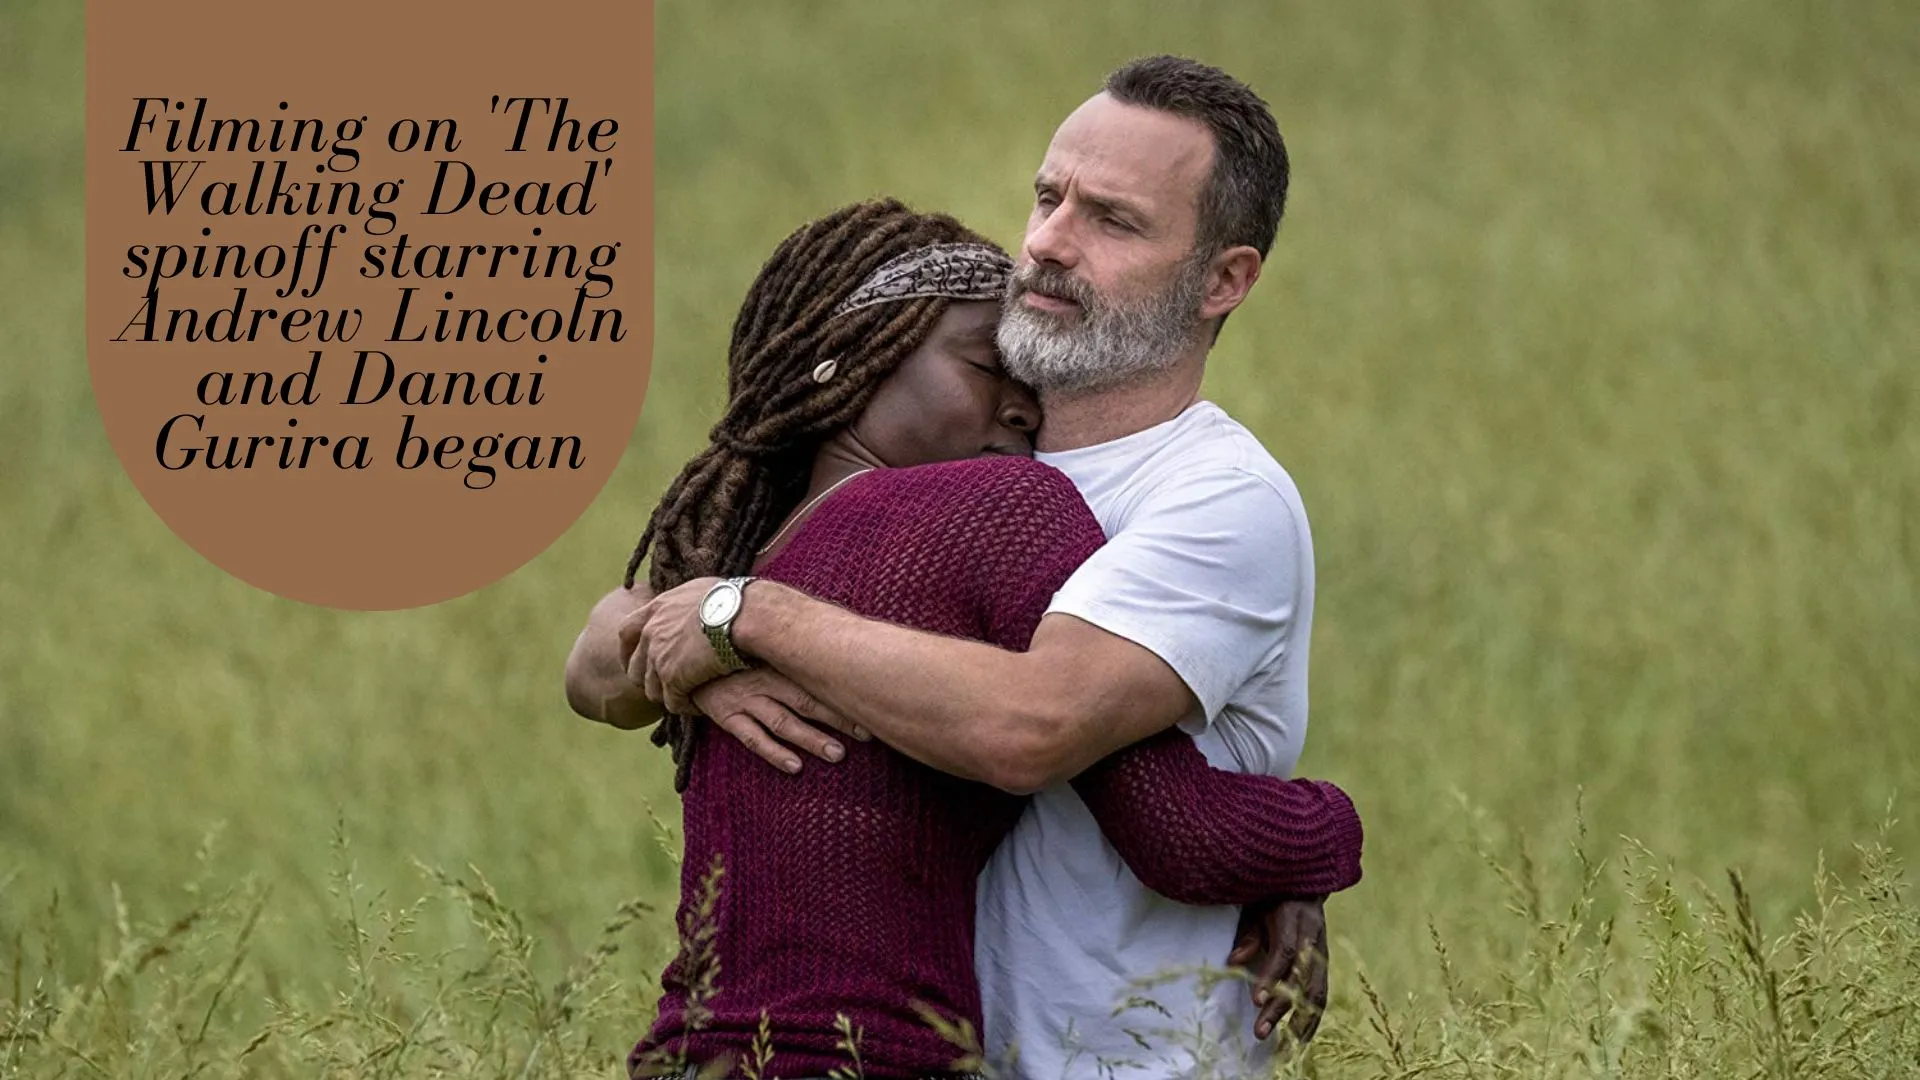 Filming on 'The Walking Dead' spinoff starring Andrew Lincoln and Danai Gurira began (Image credit: resetera)